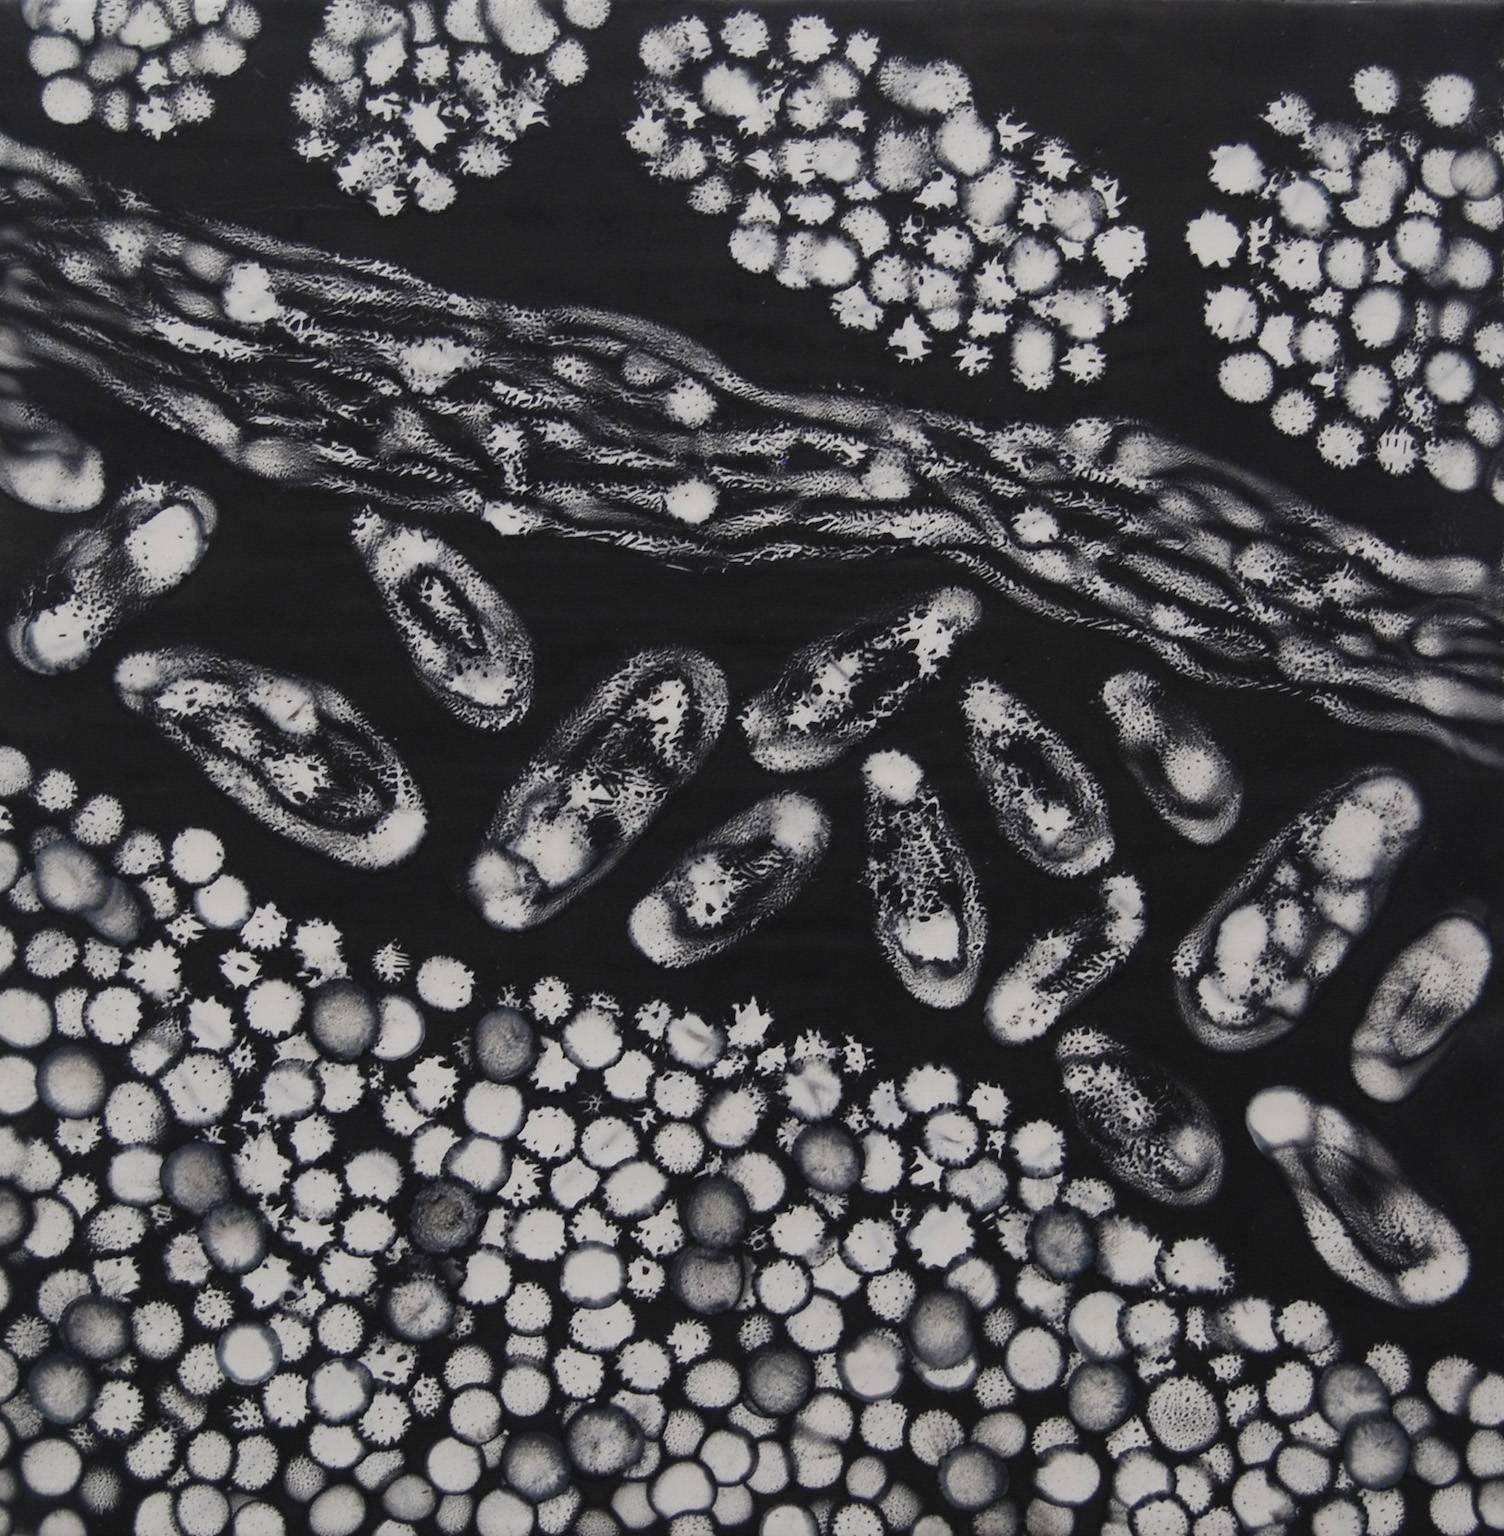 "Cells Alive 3", abstract, migration, black, white, graphite, encaustic painting